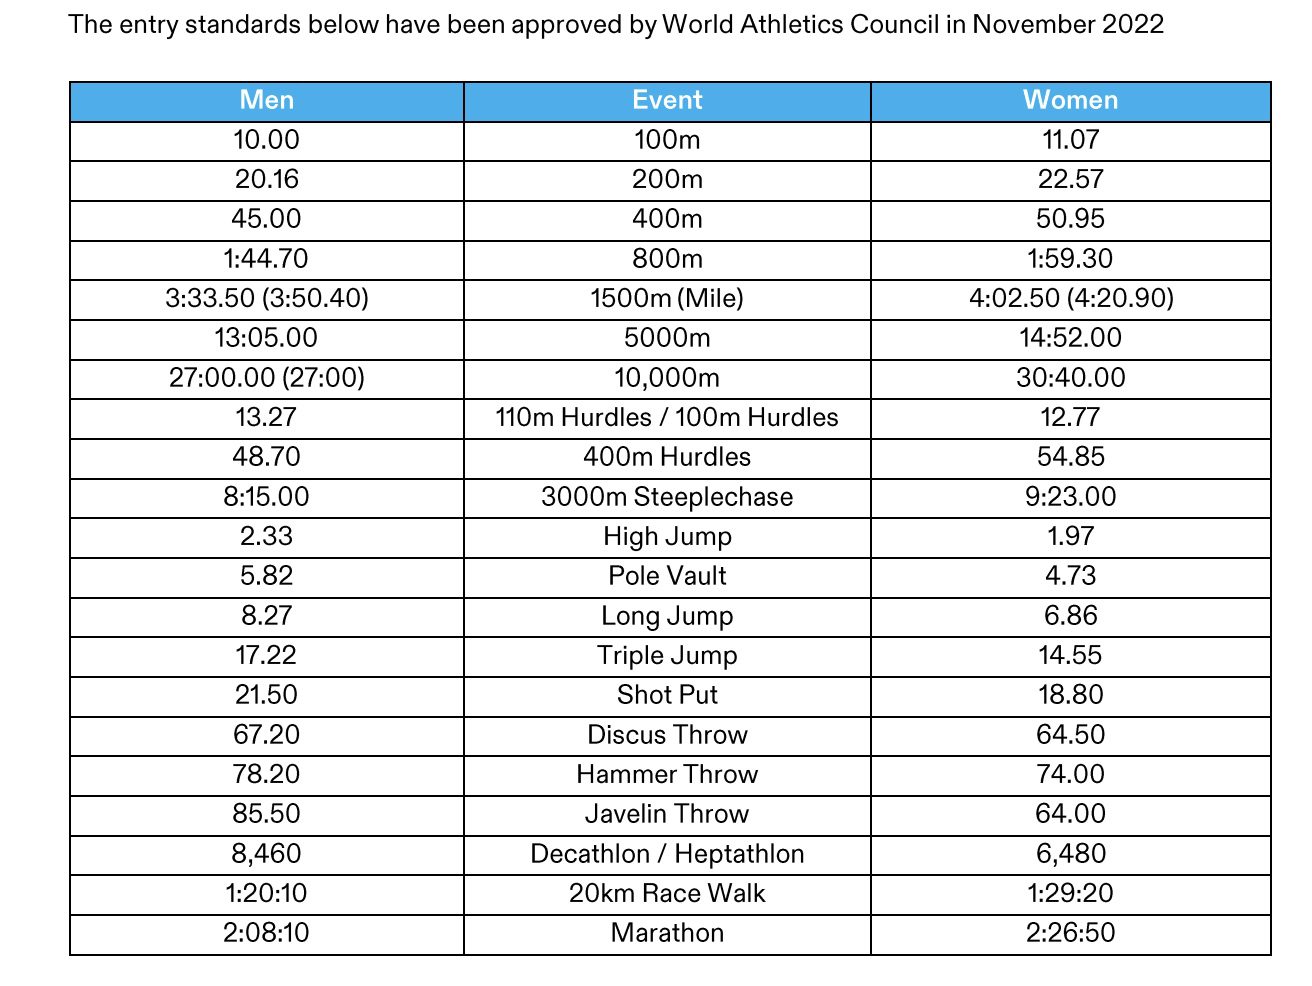 The qualifying standards for the 2024 Paris Olympics are lightning fast